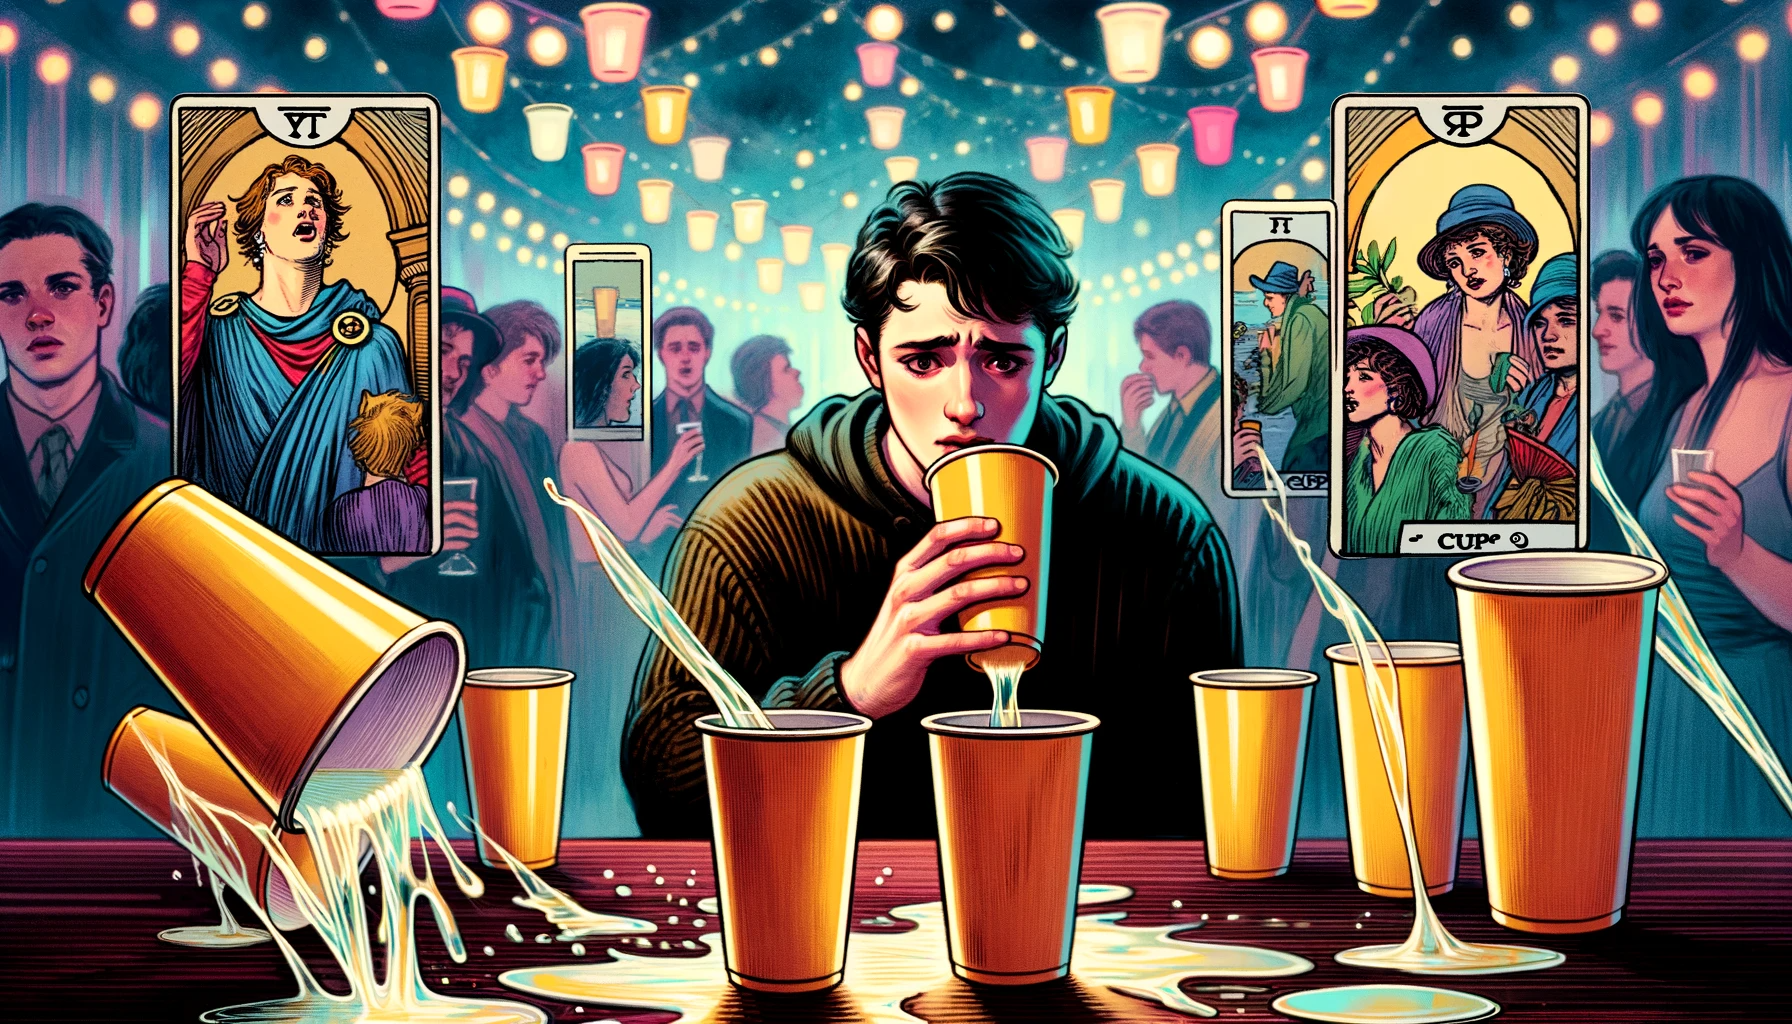 A person at a party depicted with a mixed expression of surprise and disappointment accidentally spilling their drink. The party scene is lively bu